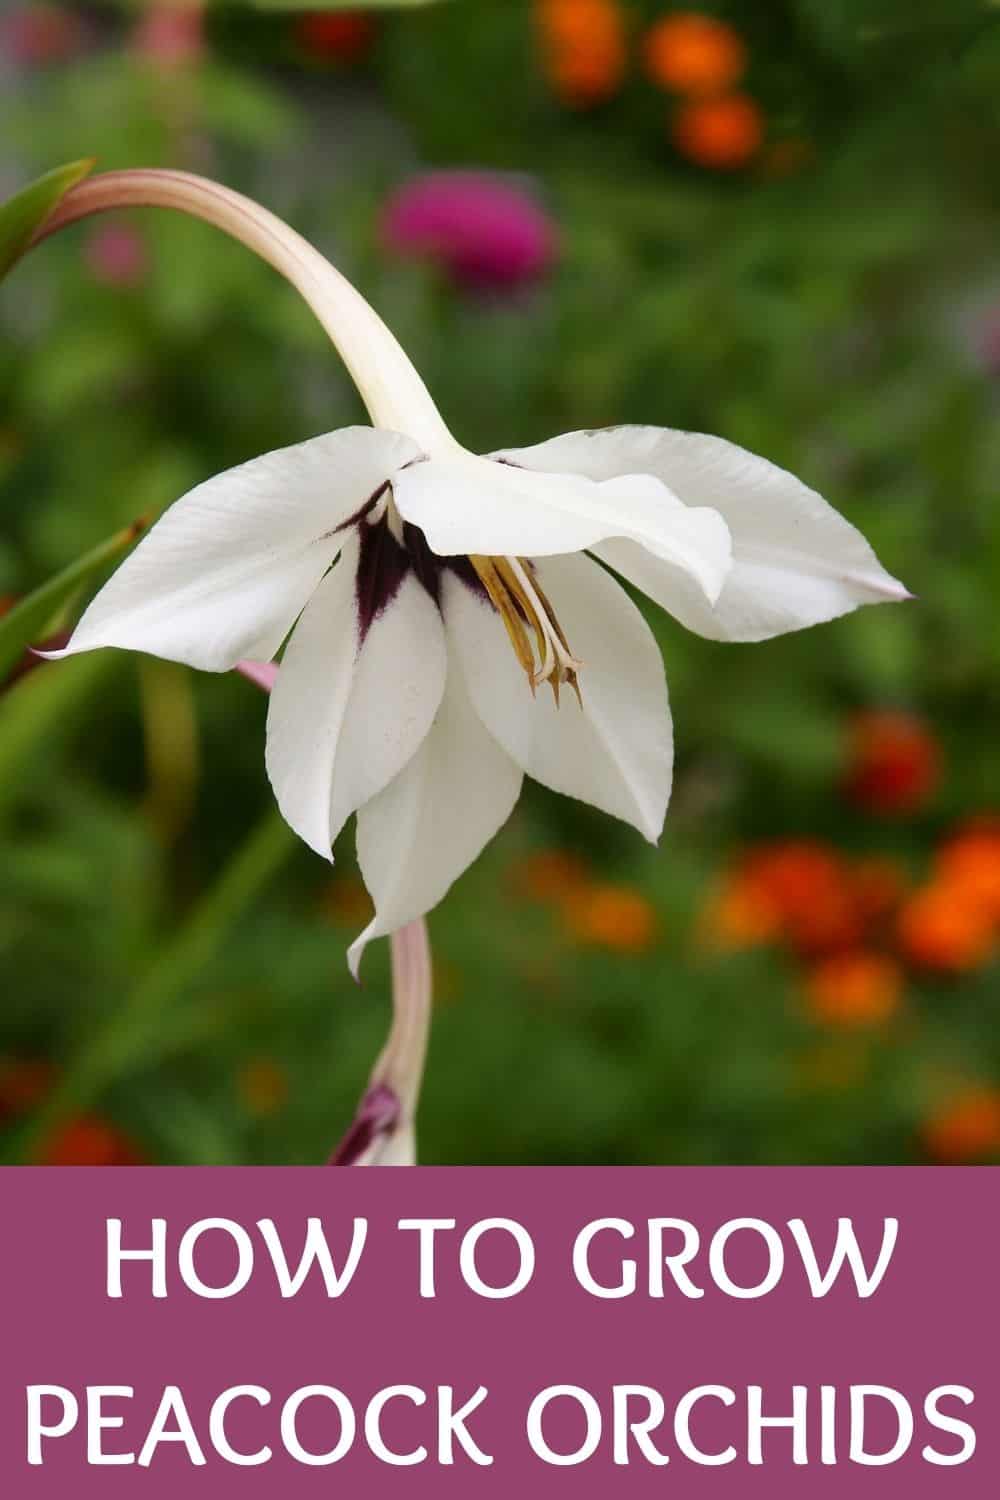 How to grow peacock orchids